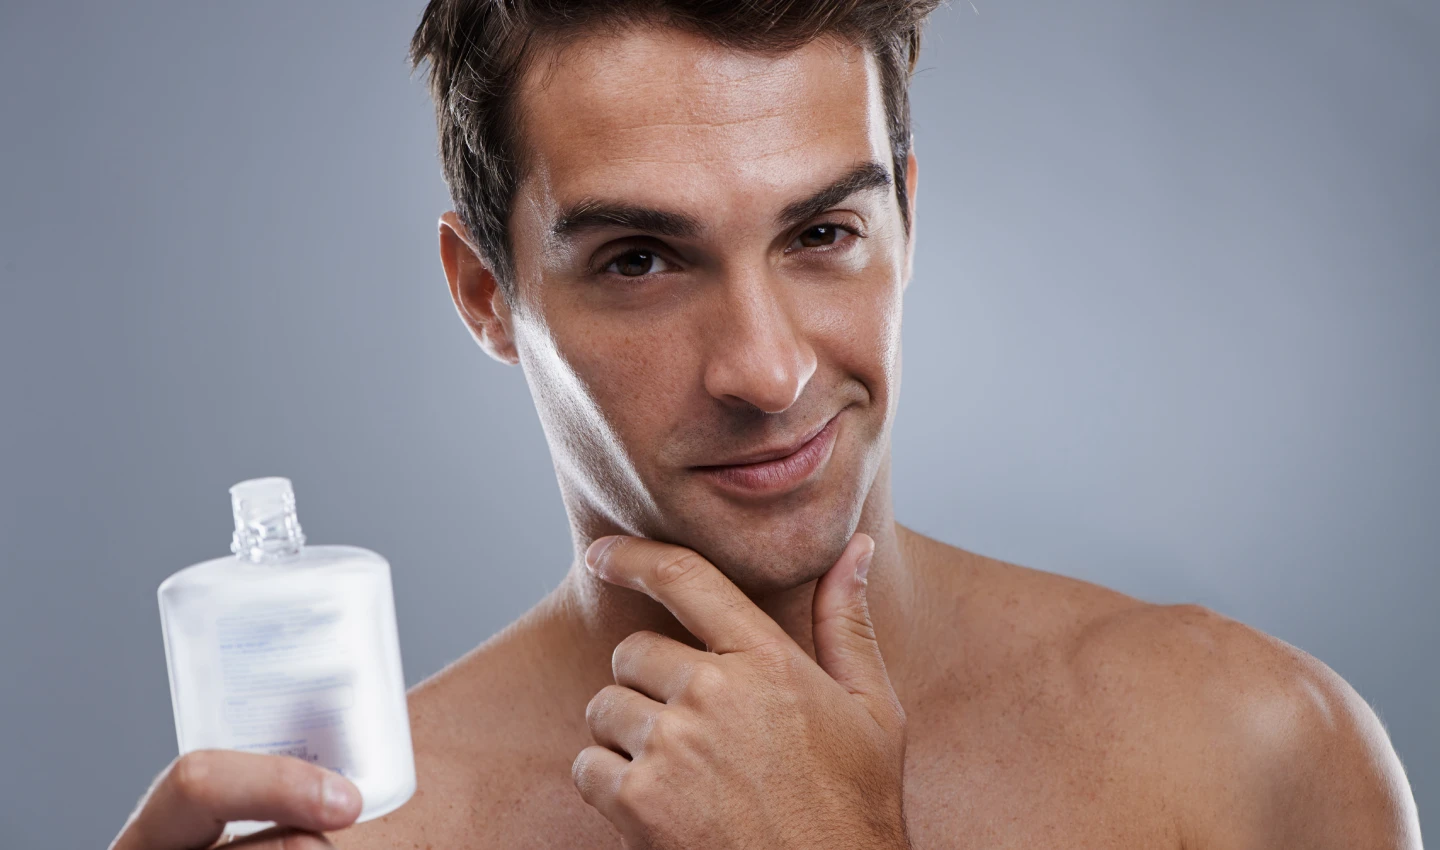 A man with a shaved face smiles after using aftershave, emphasizing the benefits of including aftershave in a men's skincare routine.